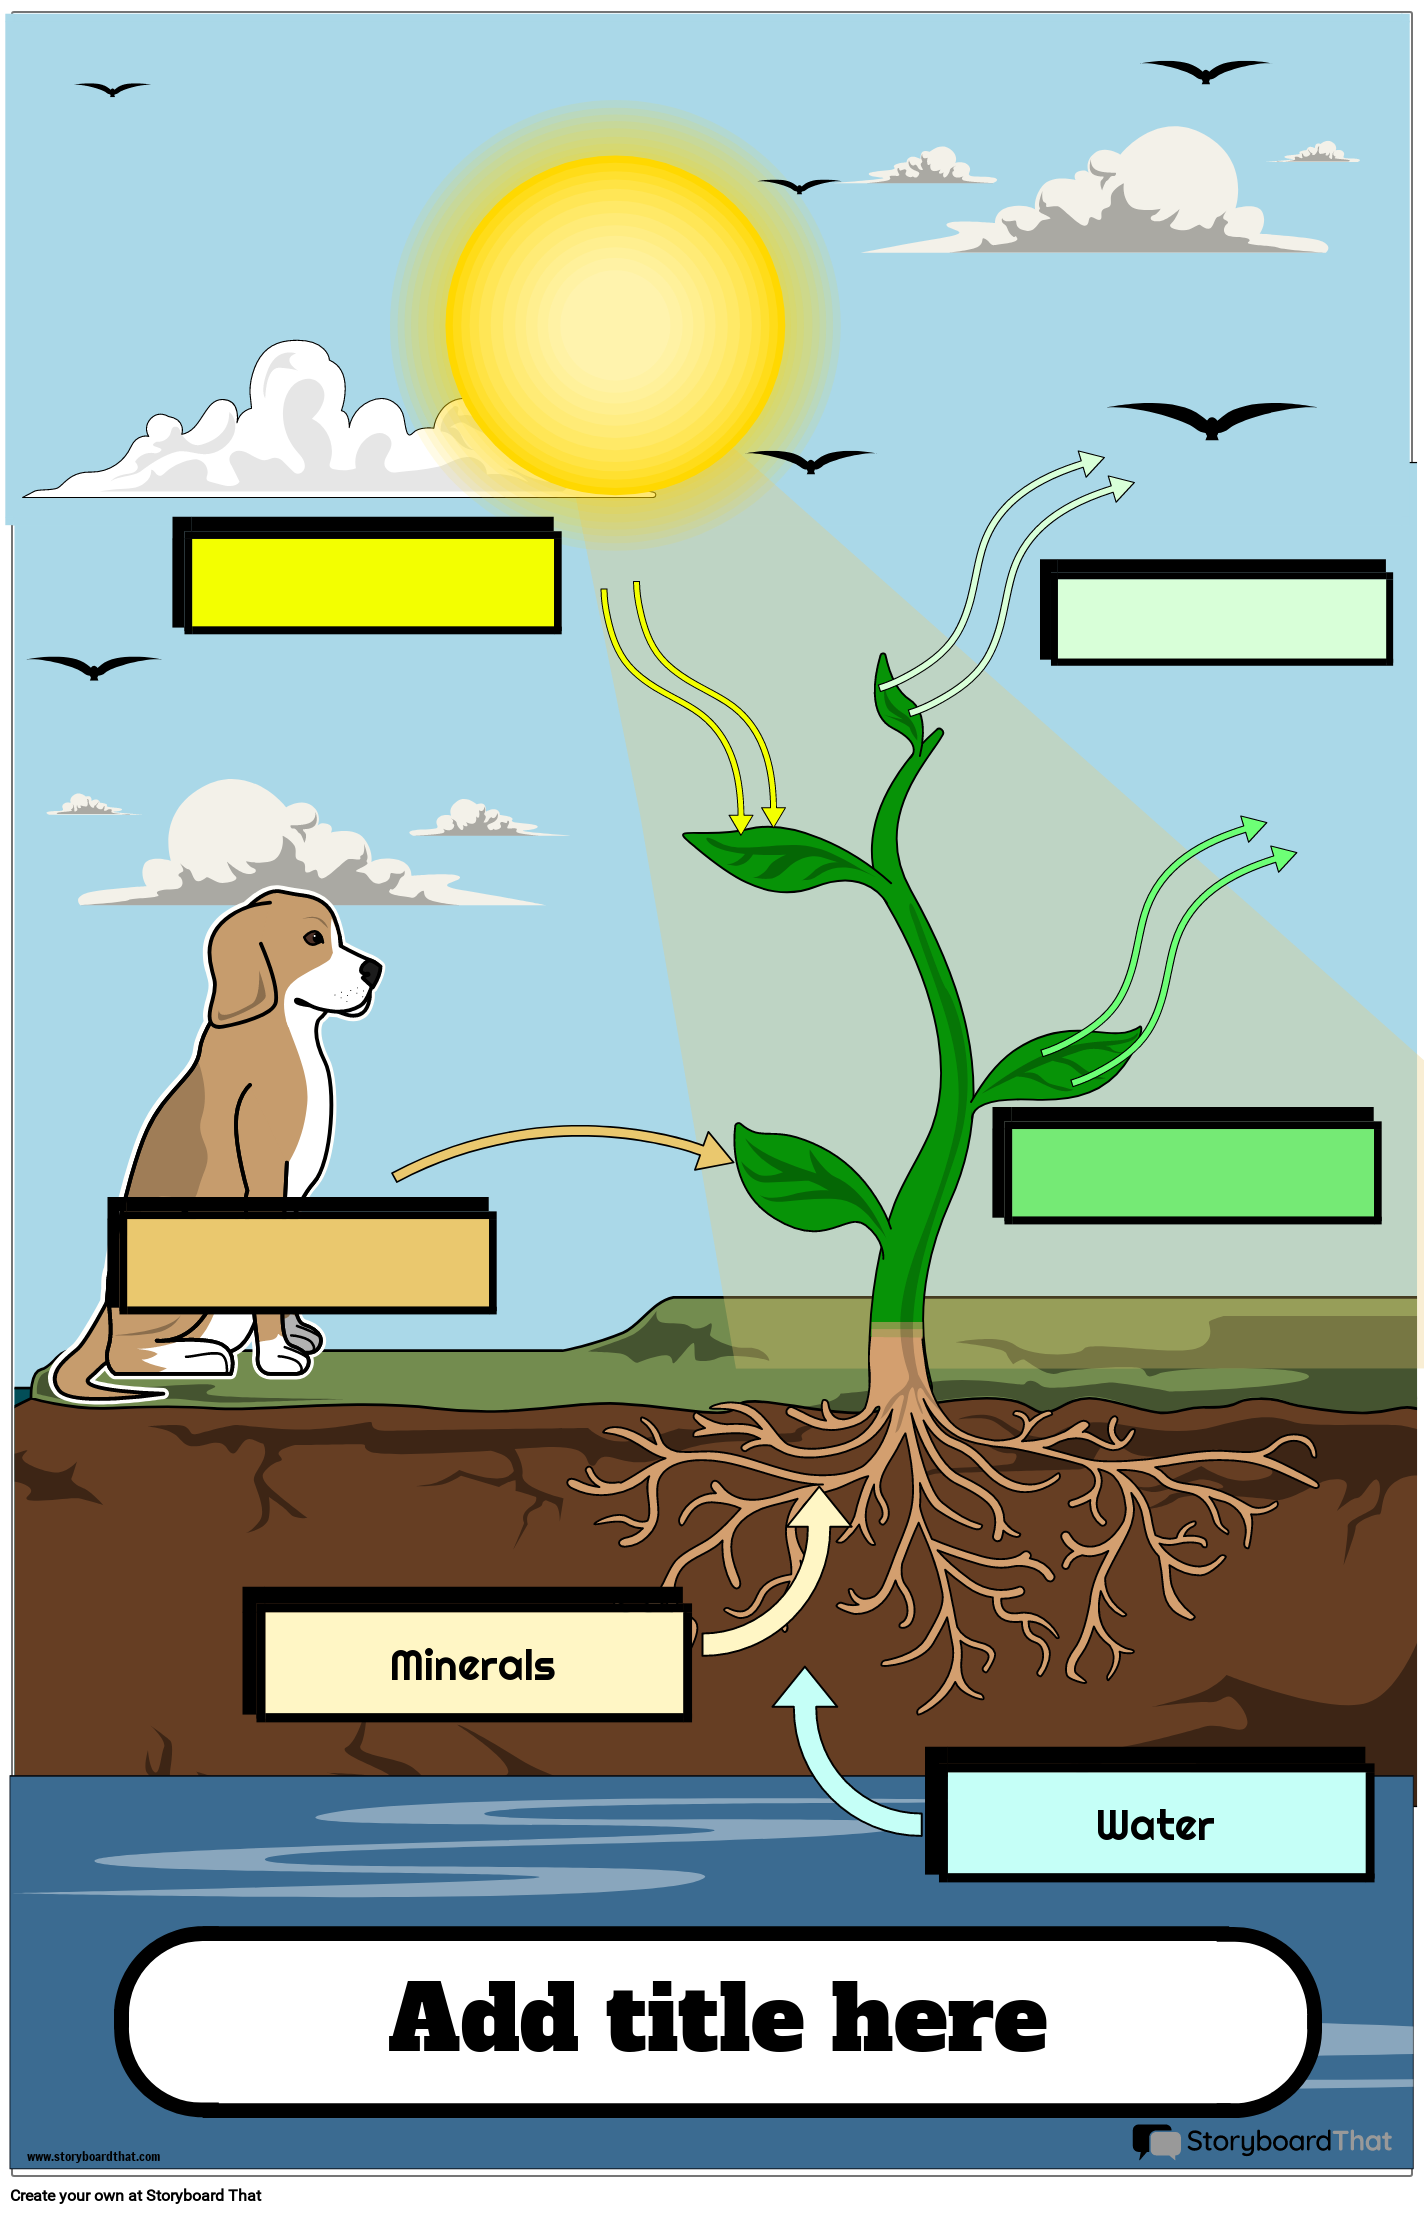 Poster Illustrating Key Components of Photosynthetic Processes